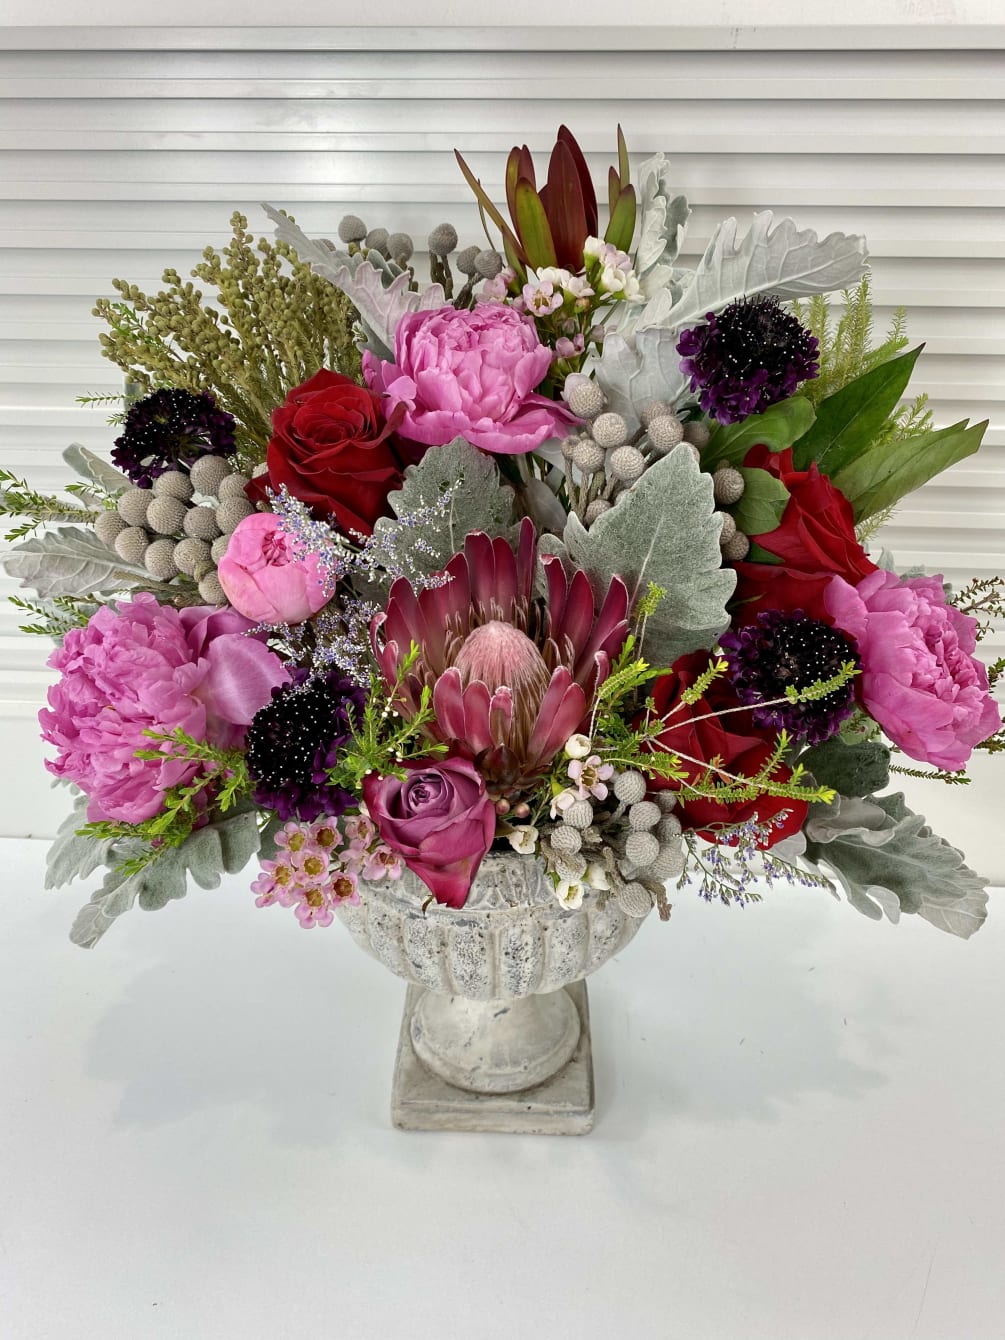 Elegant one-sided flower arrangement with peonies, roses, protea and wax flower surrounded